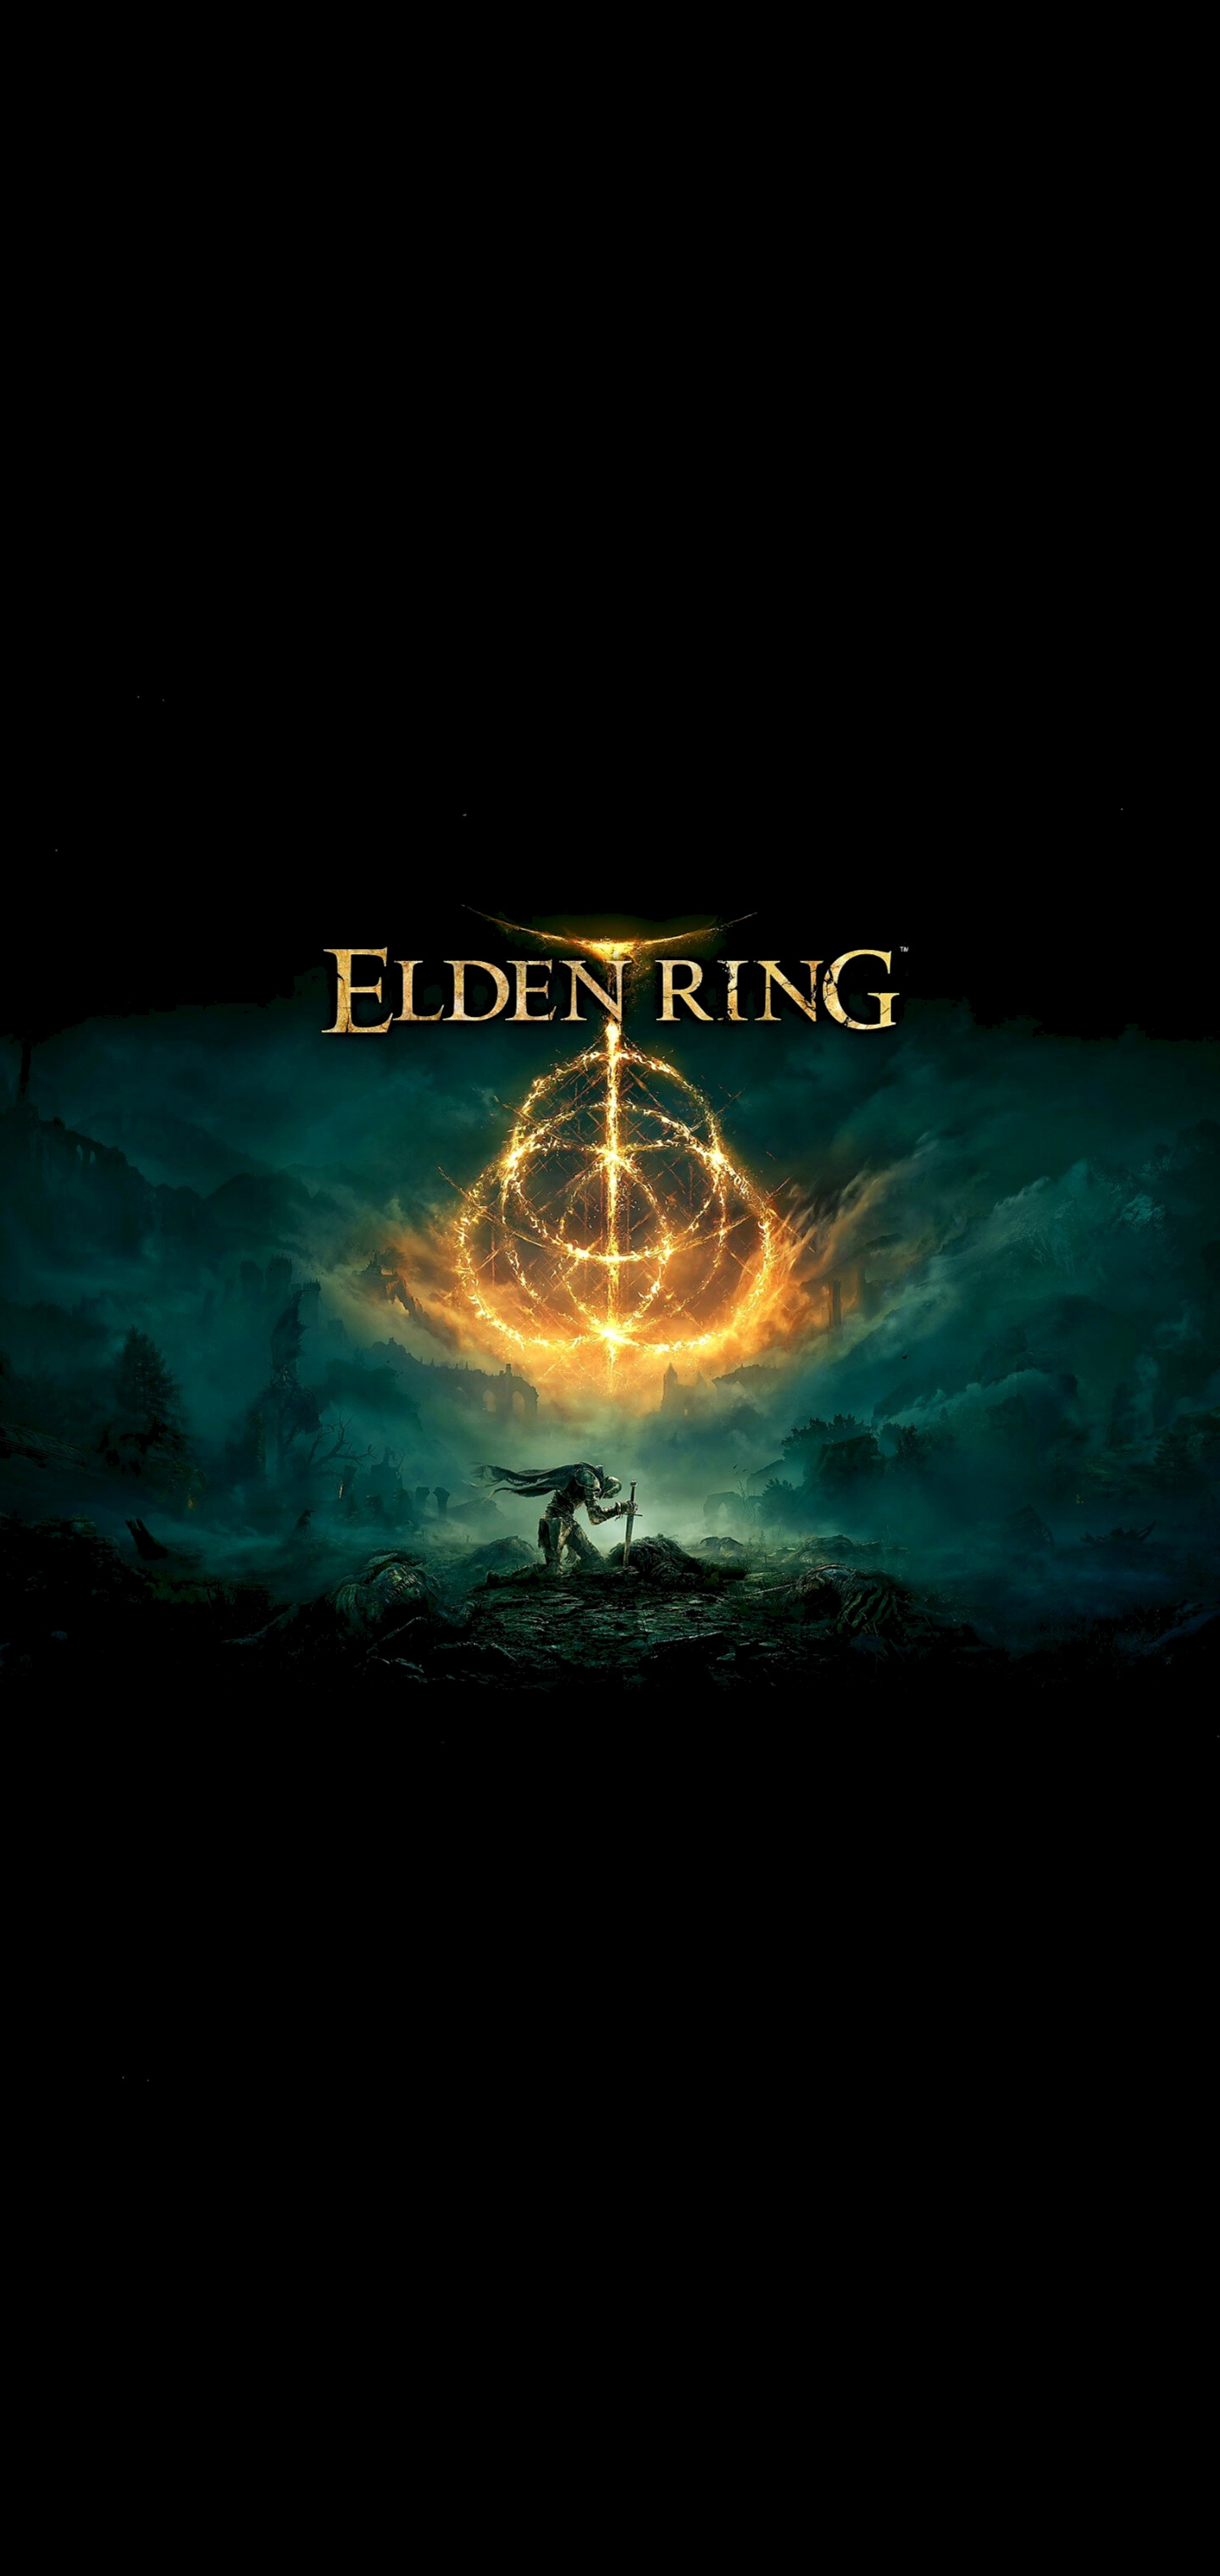 Elden Ring: A warrior tasked with restoring the ring and becoming ruler of a new kingdom, Gameplay. 1440x3040 HD Wallpaper.